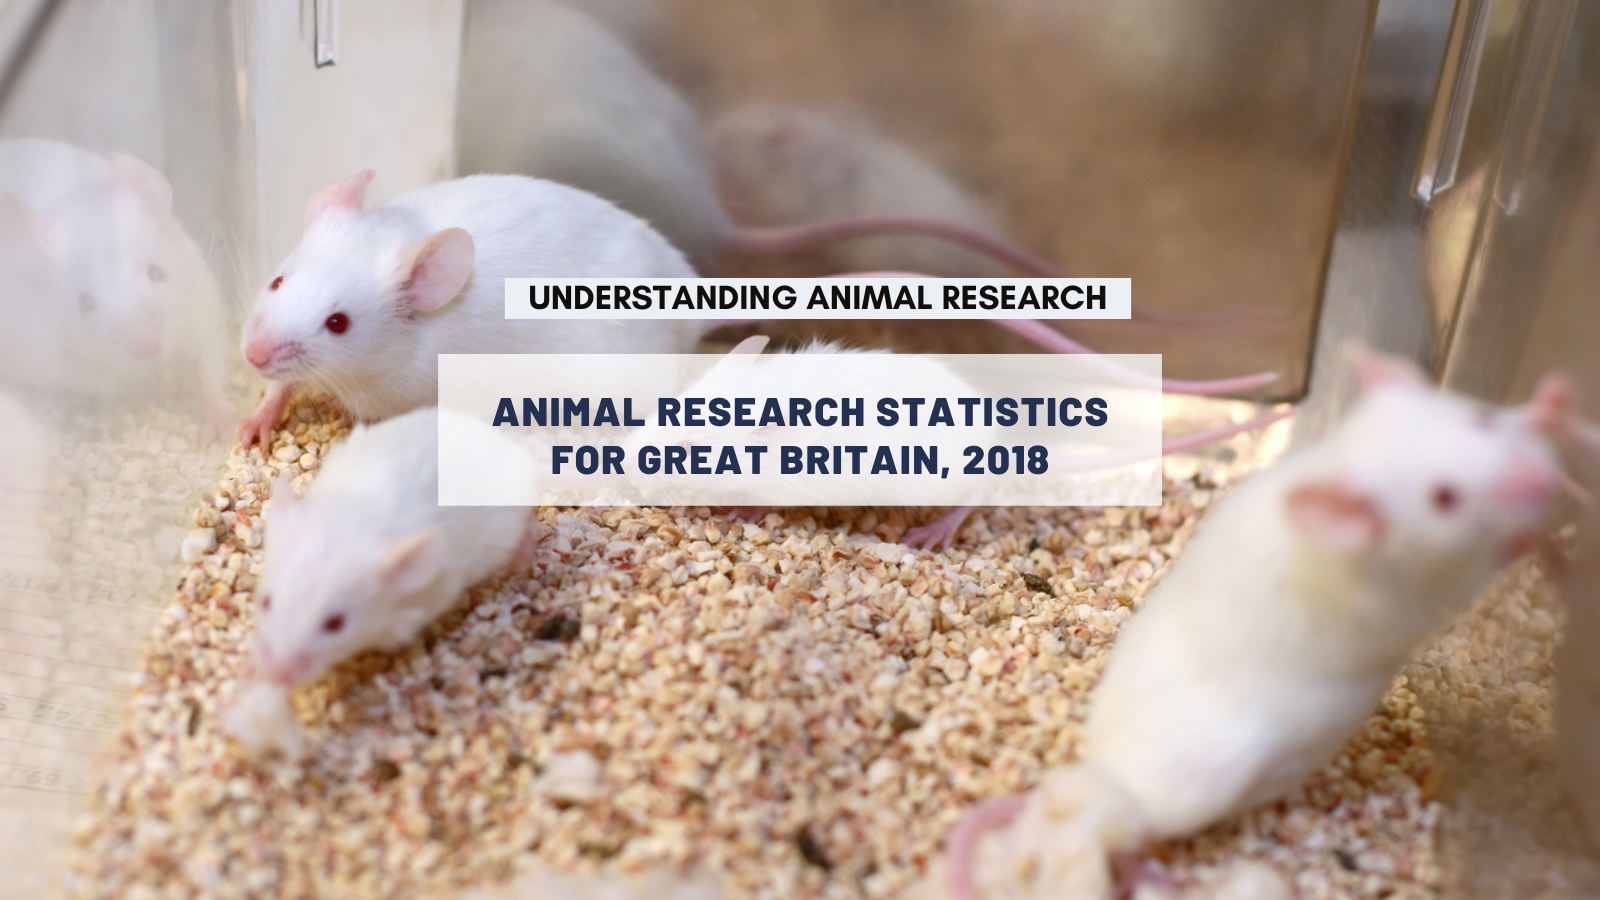 Animal research statistics for Great Britain, 2018